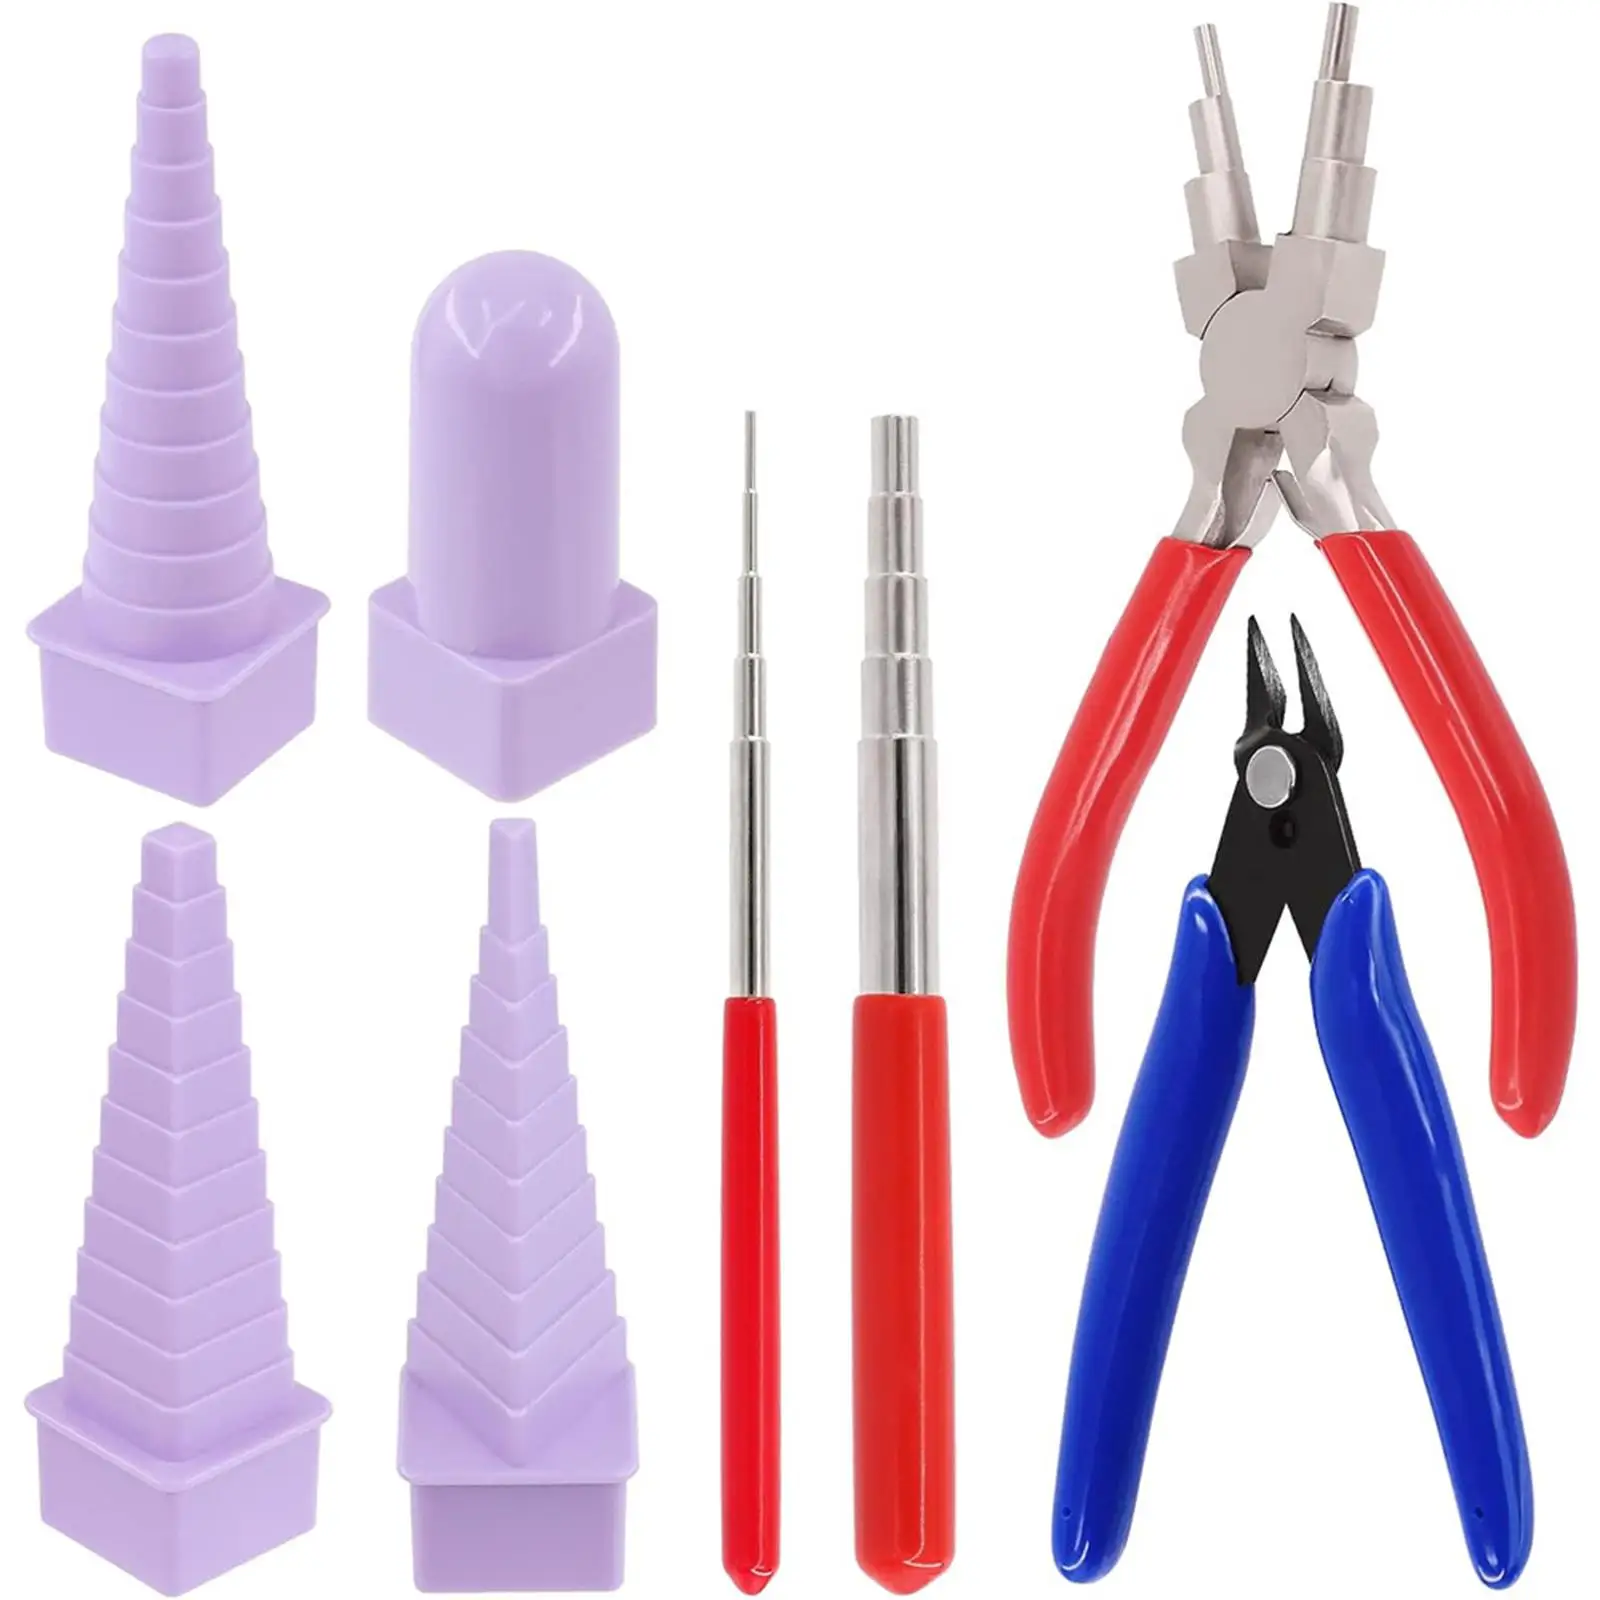 

8Pcs Wire Looping Tool Set Wire Looping Mandrel Bail Making Pliers DIY Ring Forming Tool for Jewelry Wire Wrapping Accessories